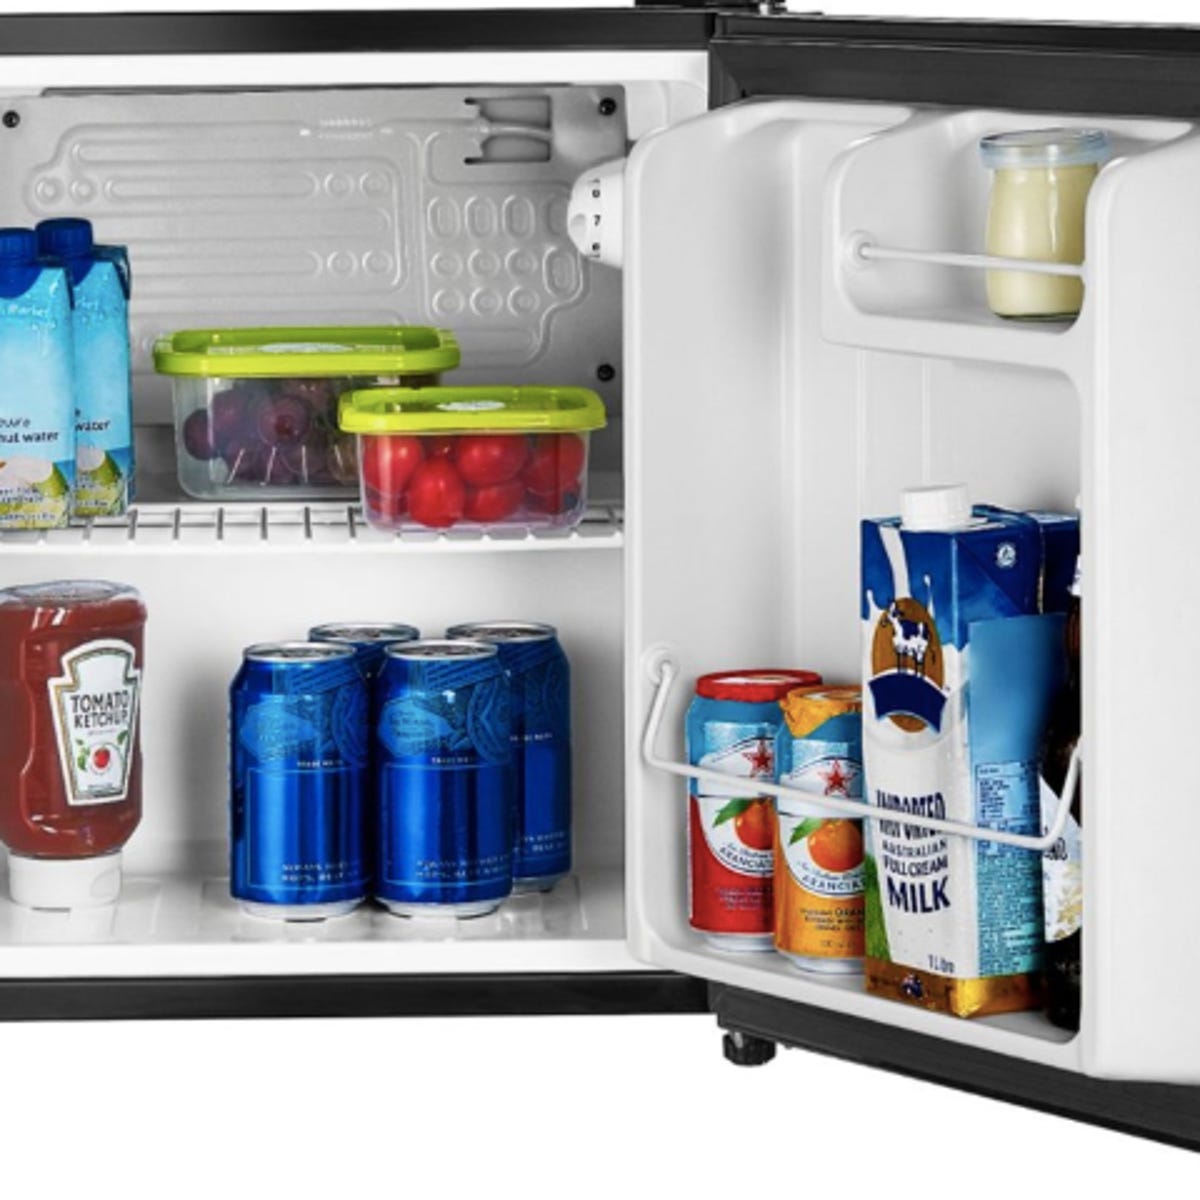 Snag this discounted mini fridge to store all of your game day